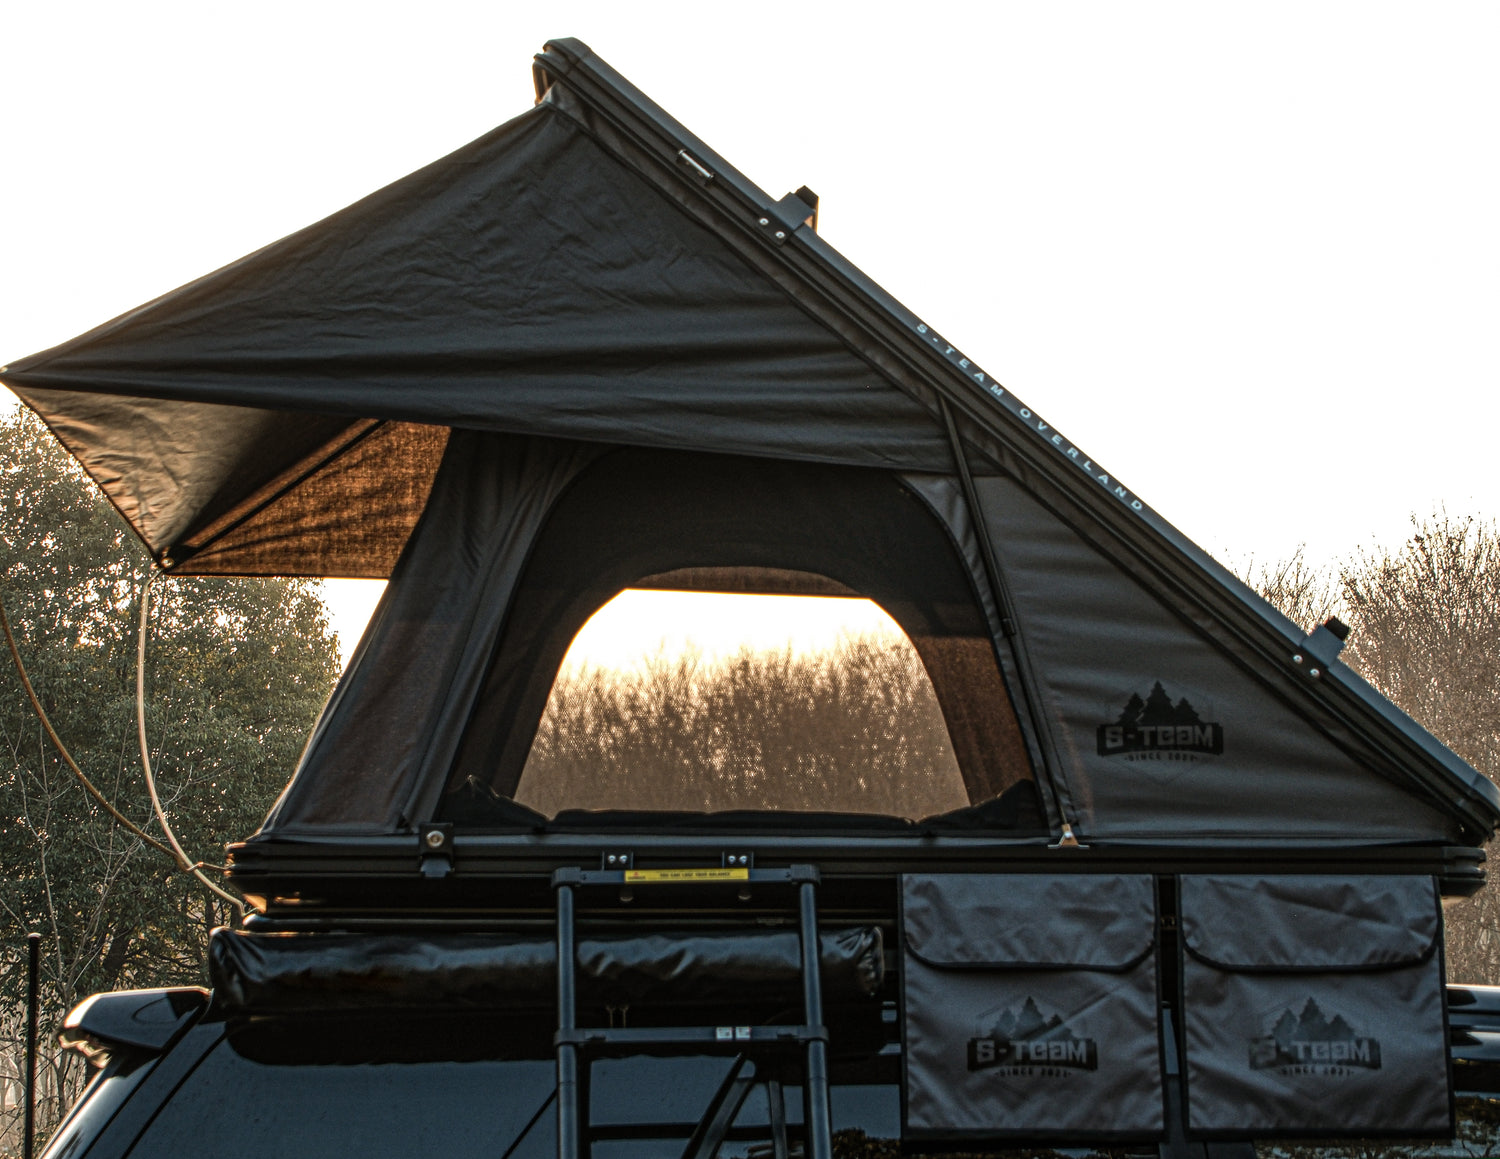 THE HARE - ALUMINUM CLAMSHELL ROOF TOP TENT